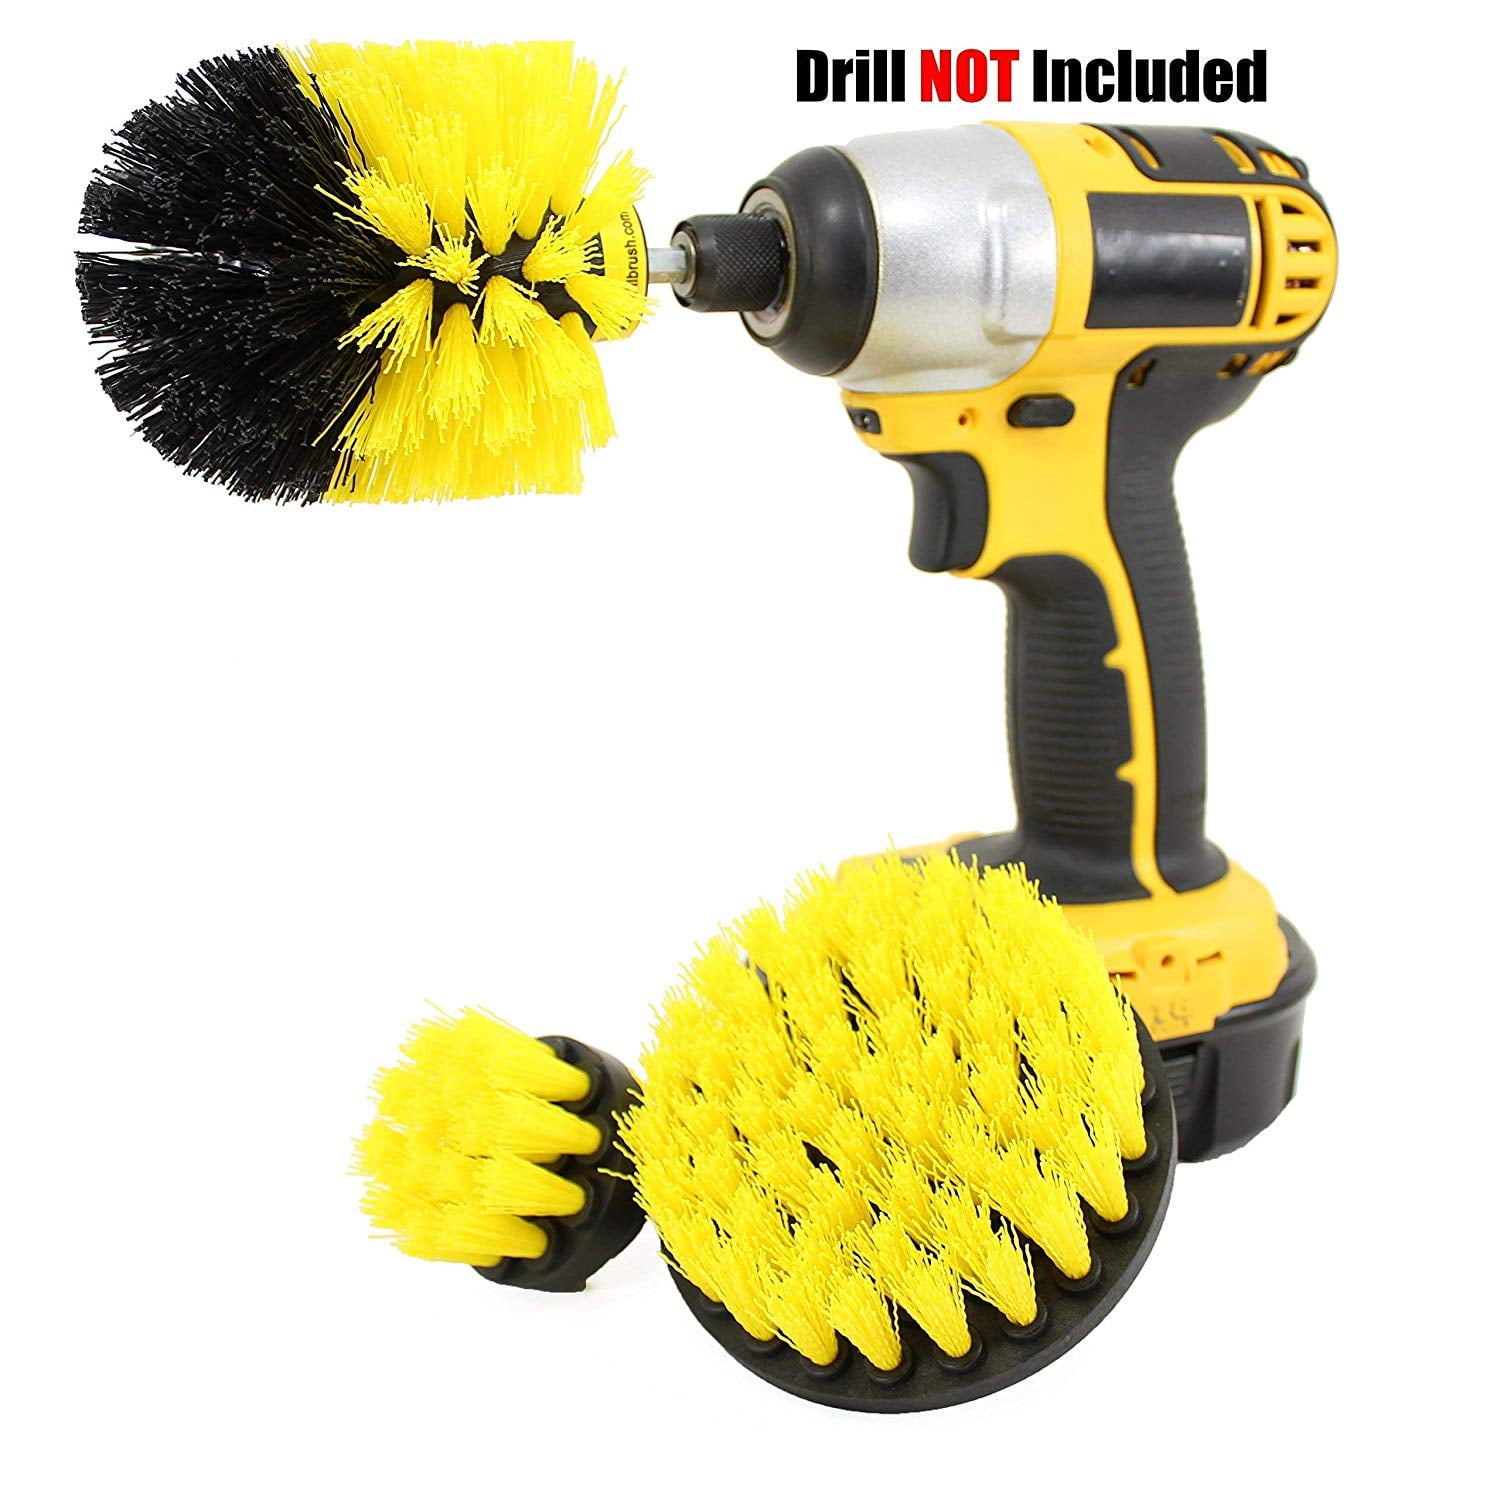 2pcs Electric Drill Brush Attachment for Car Tile Grout Flooring Cleaning 